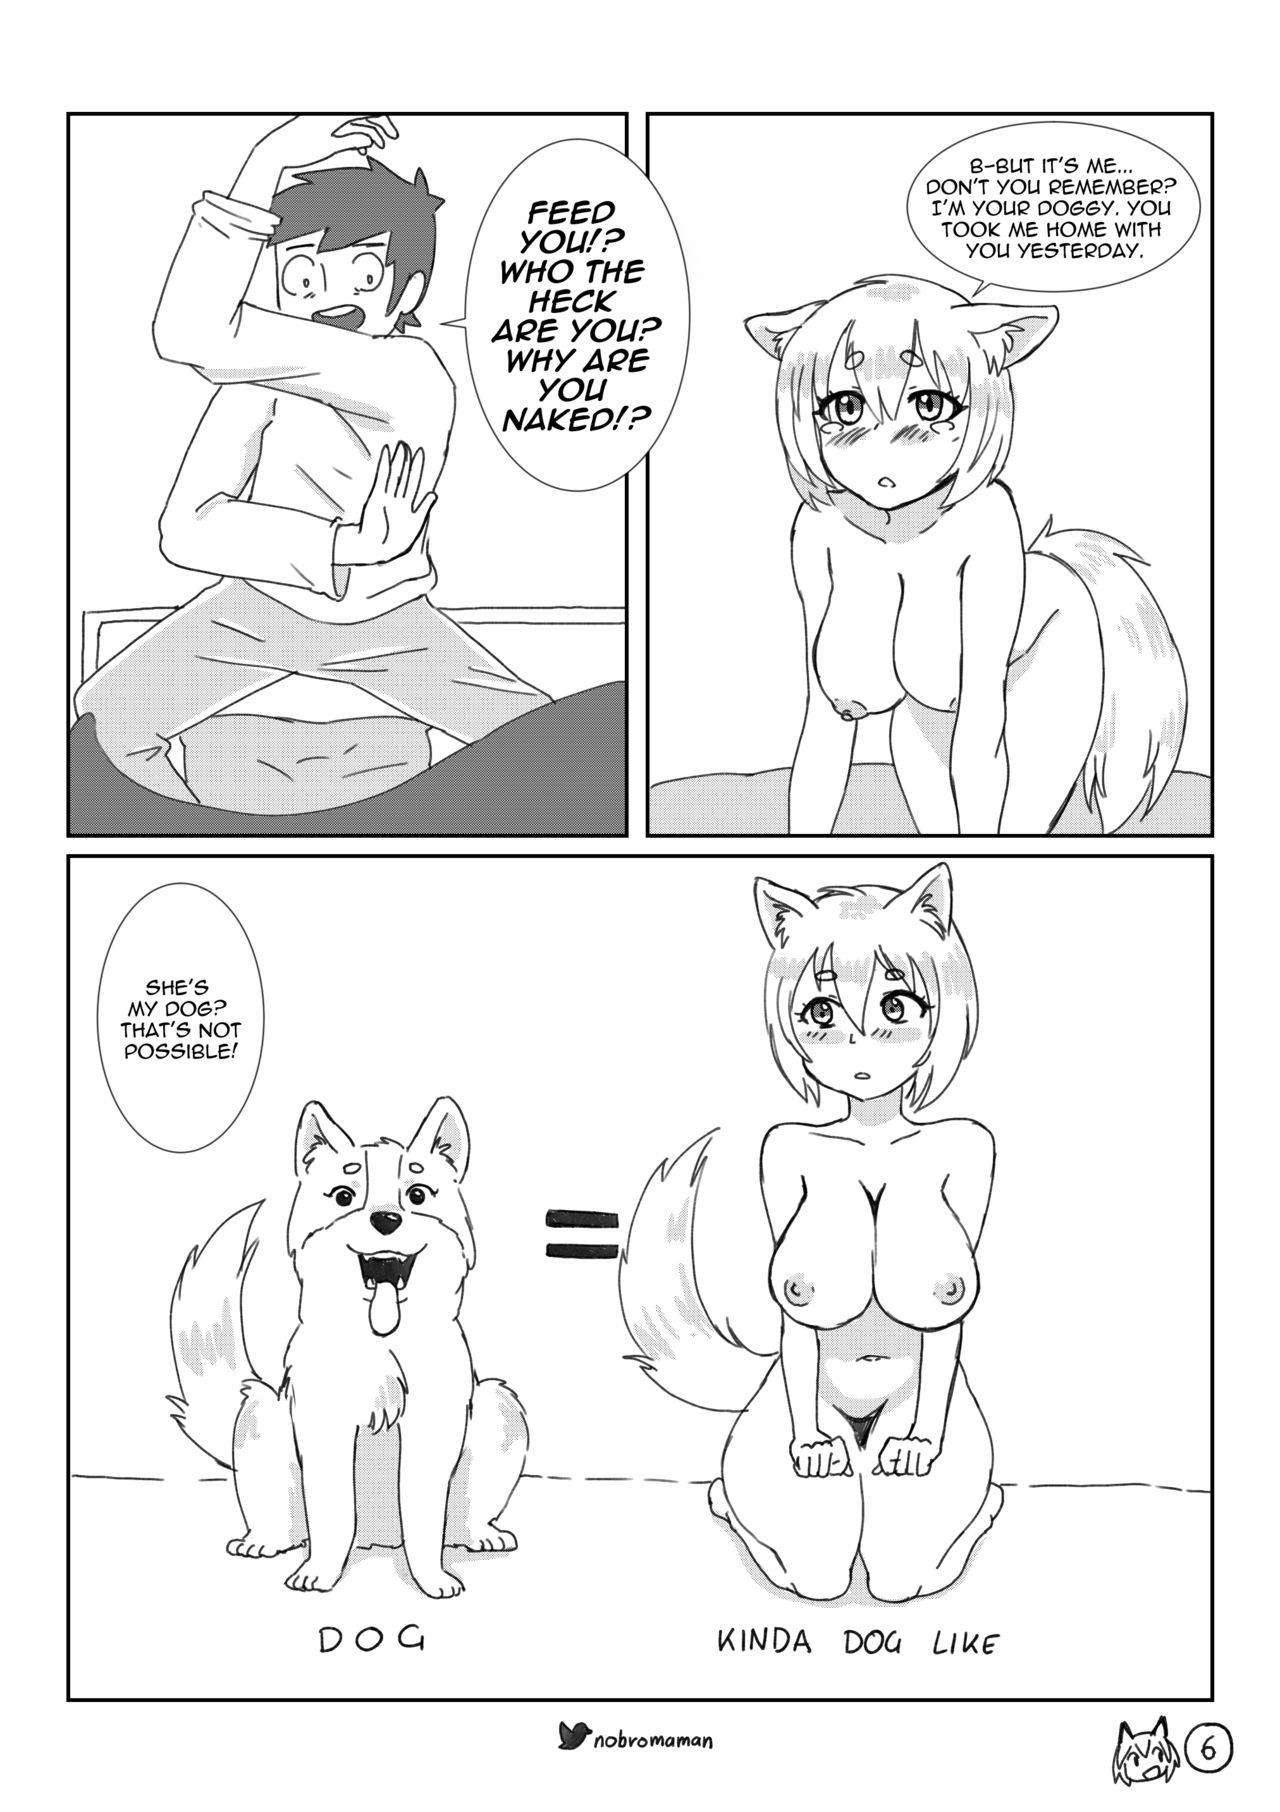 Life with a dog girl - Chapter1 6